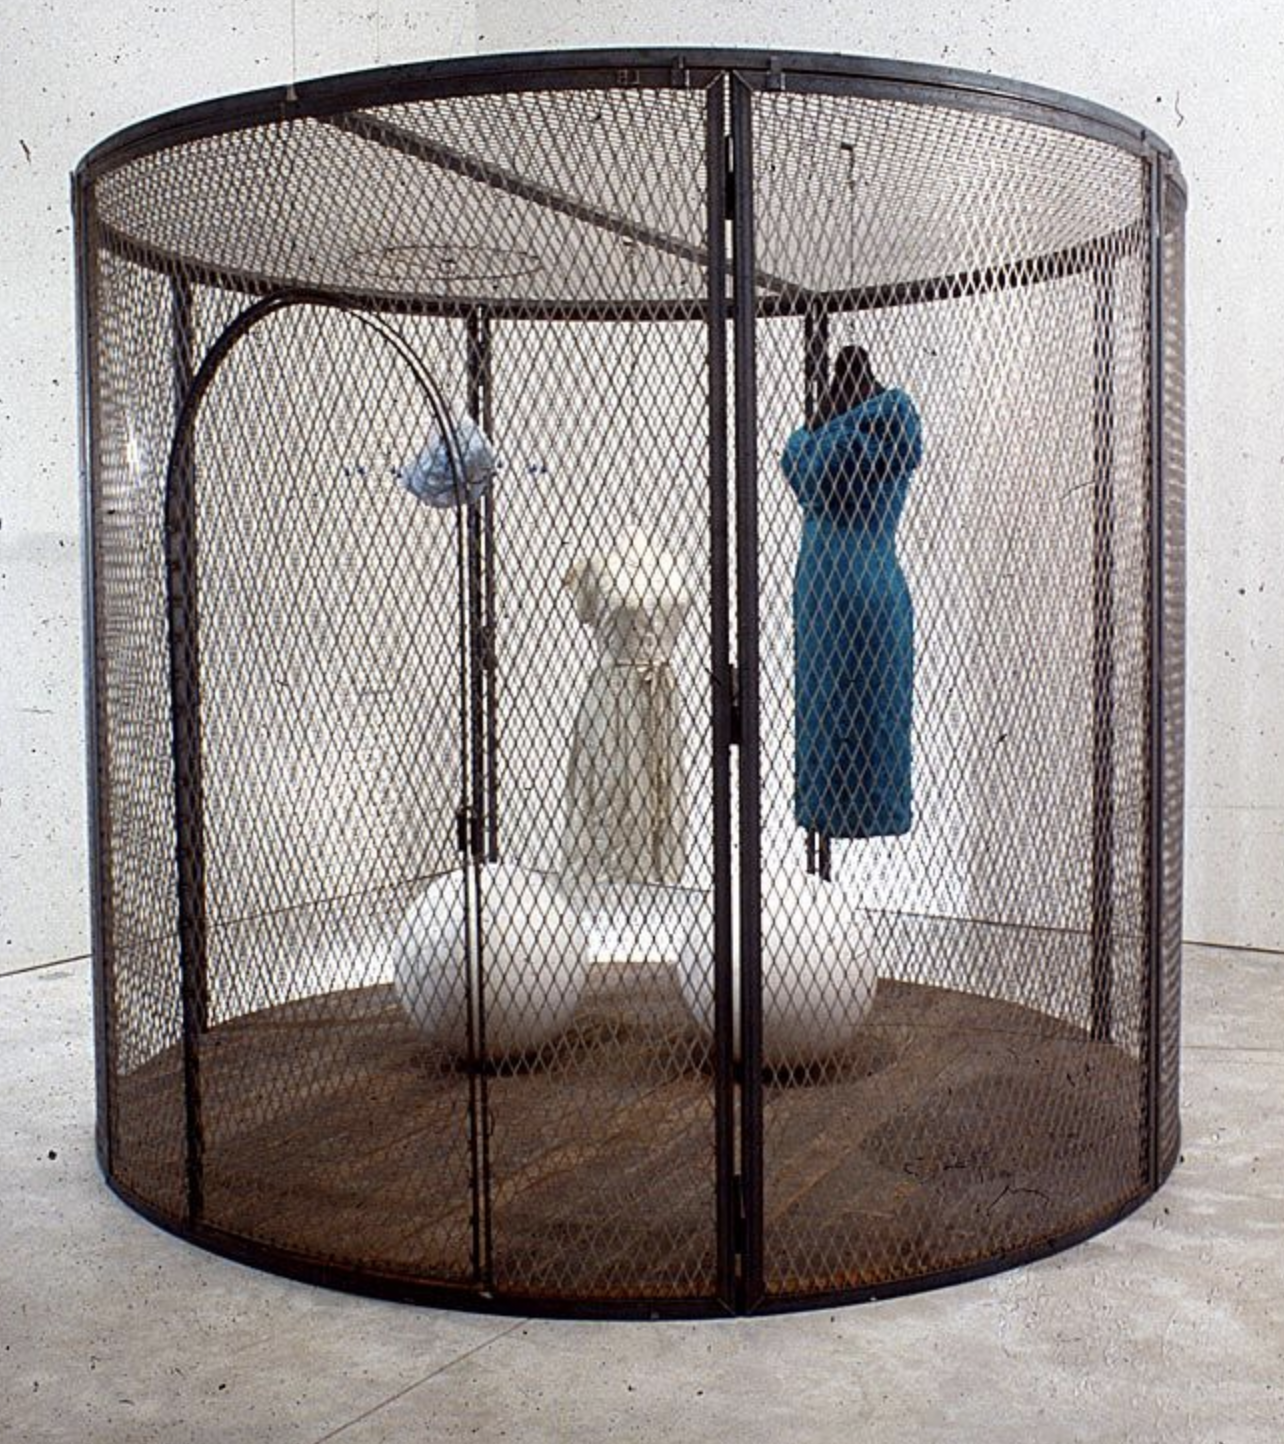 The Fertile Metaphor: Louise Bourgeois and 'The Woven Child' — Jim  Carroll's Blog